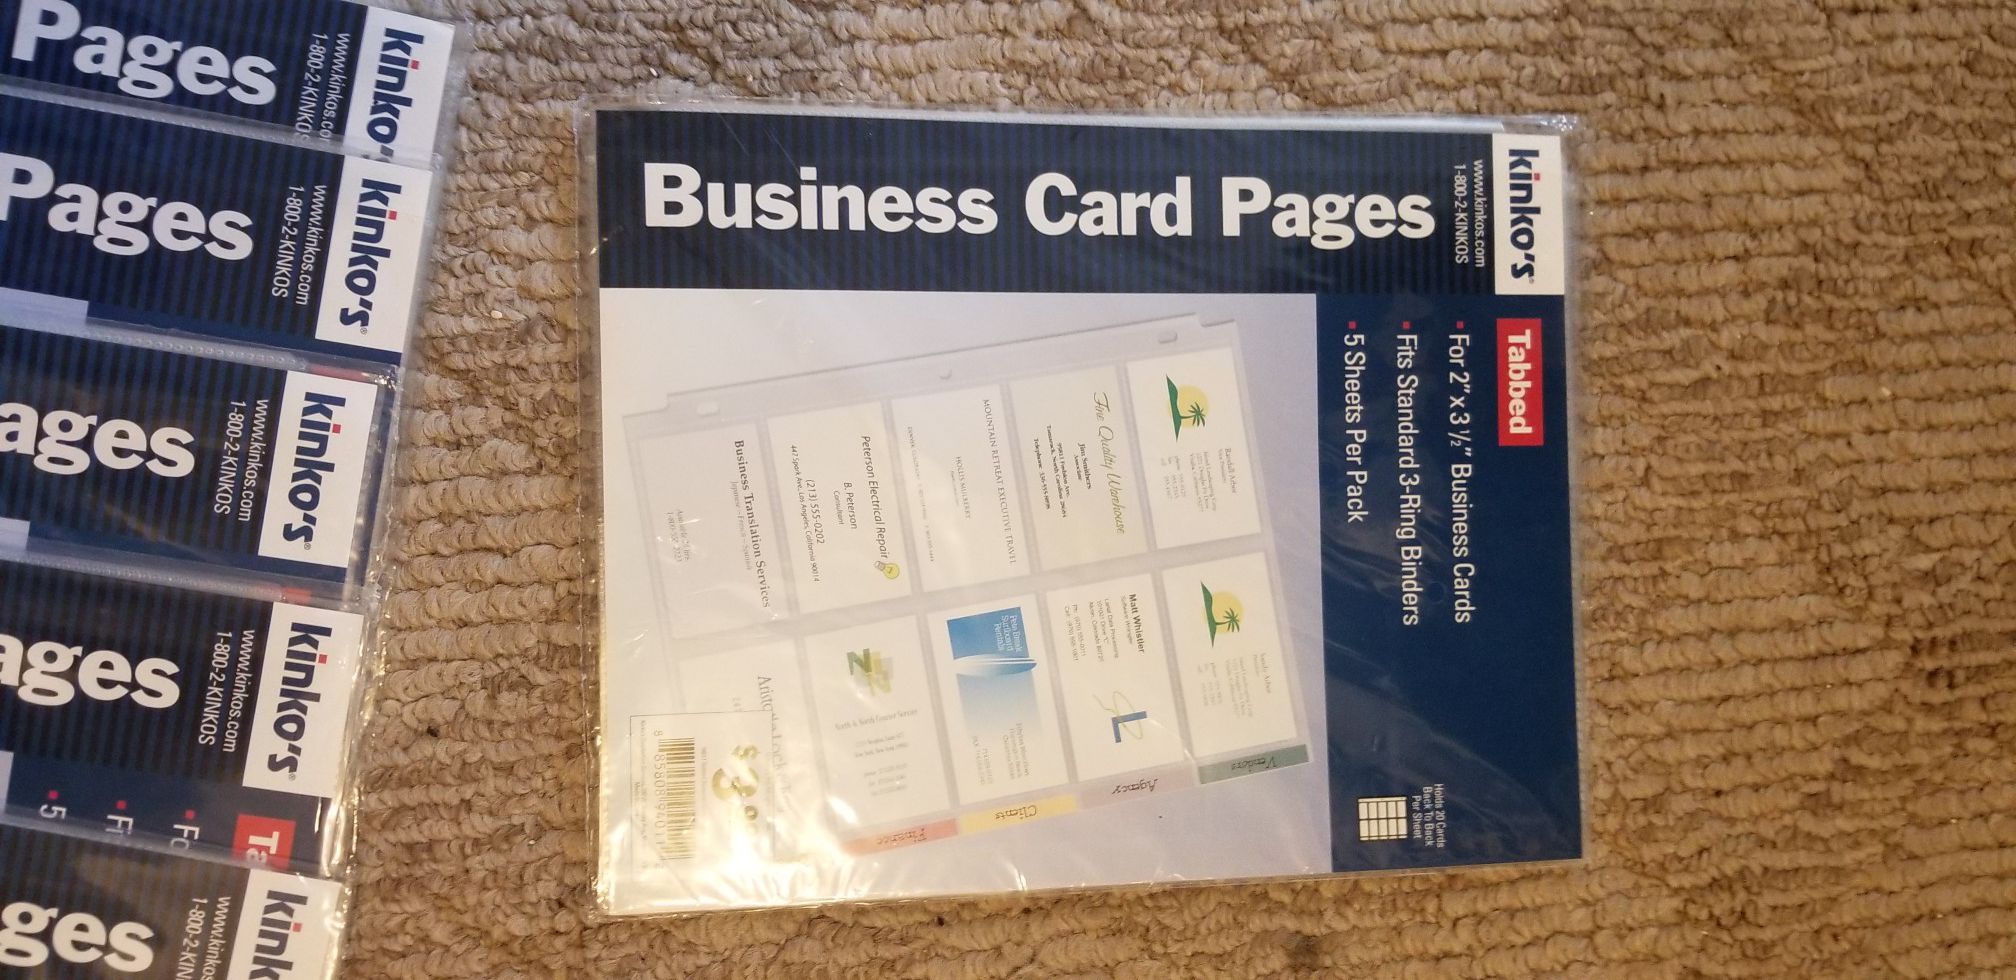 Business Card Page Holders 5 sheets per pack